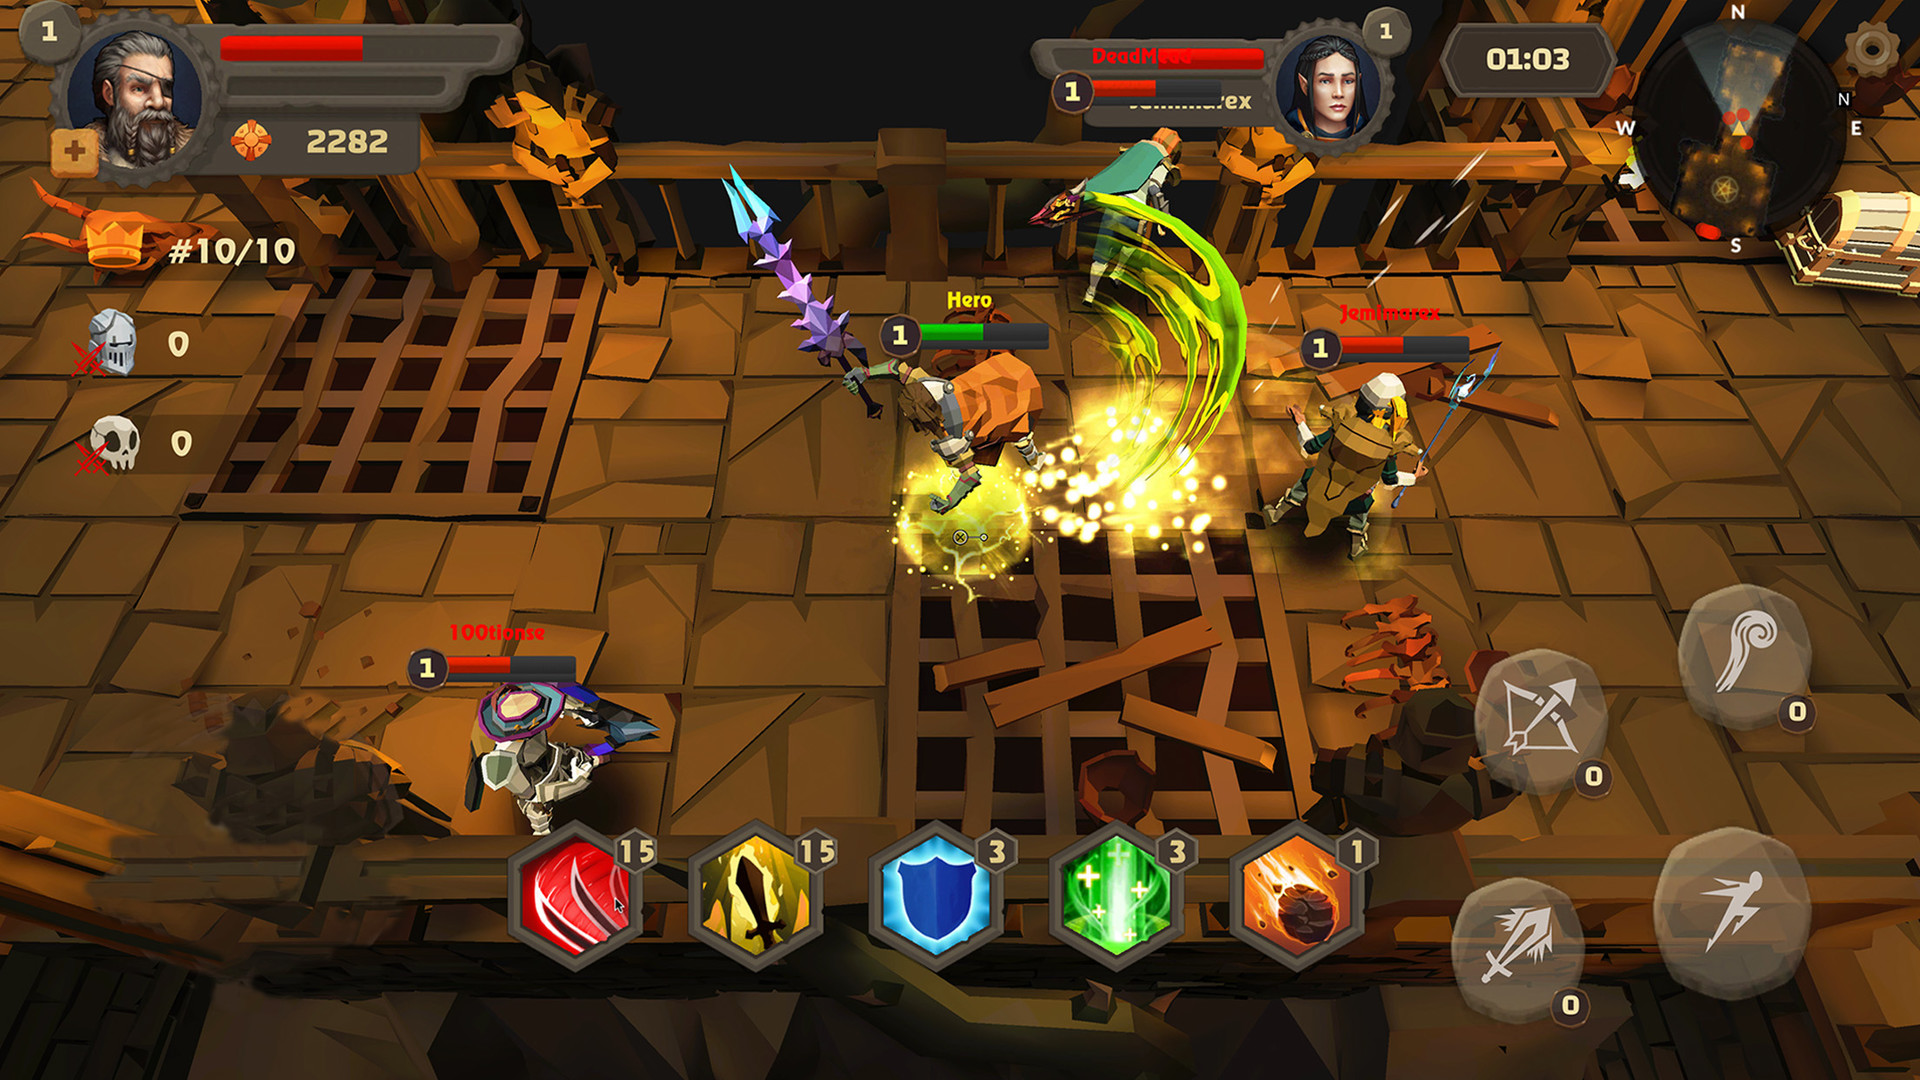 FREE DOWNLOAD » Overlord - RPG Online Battle | Skidrow Cracked